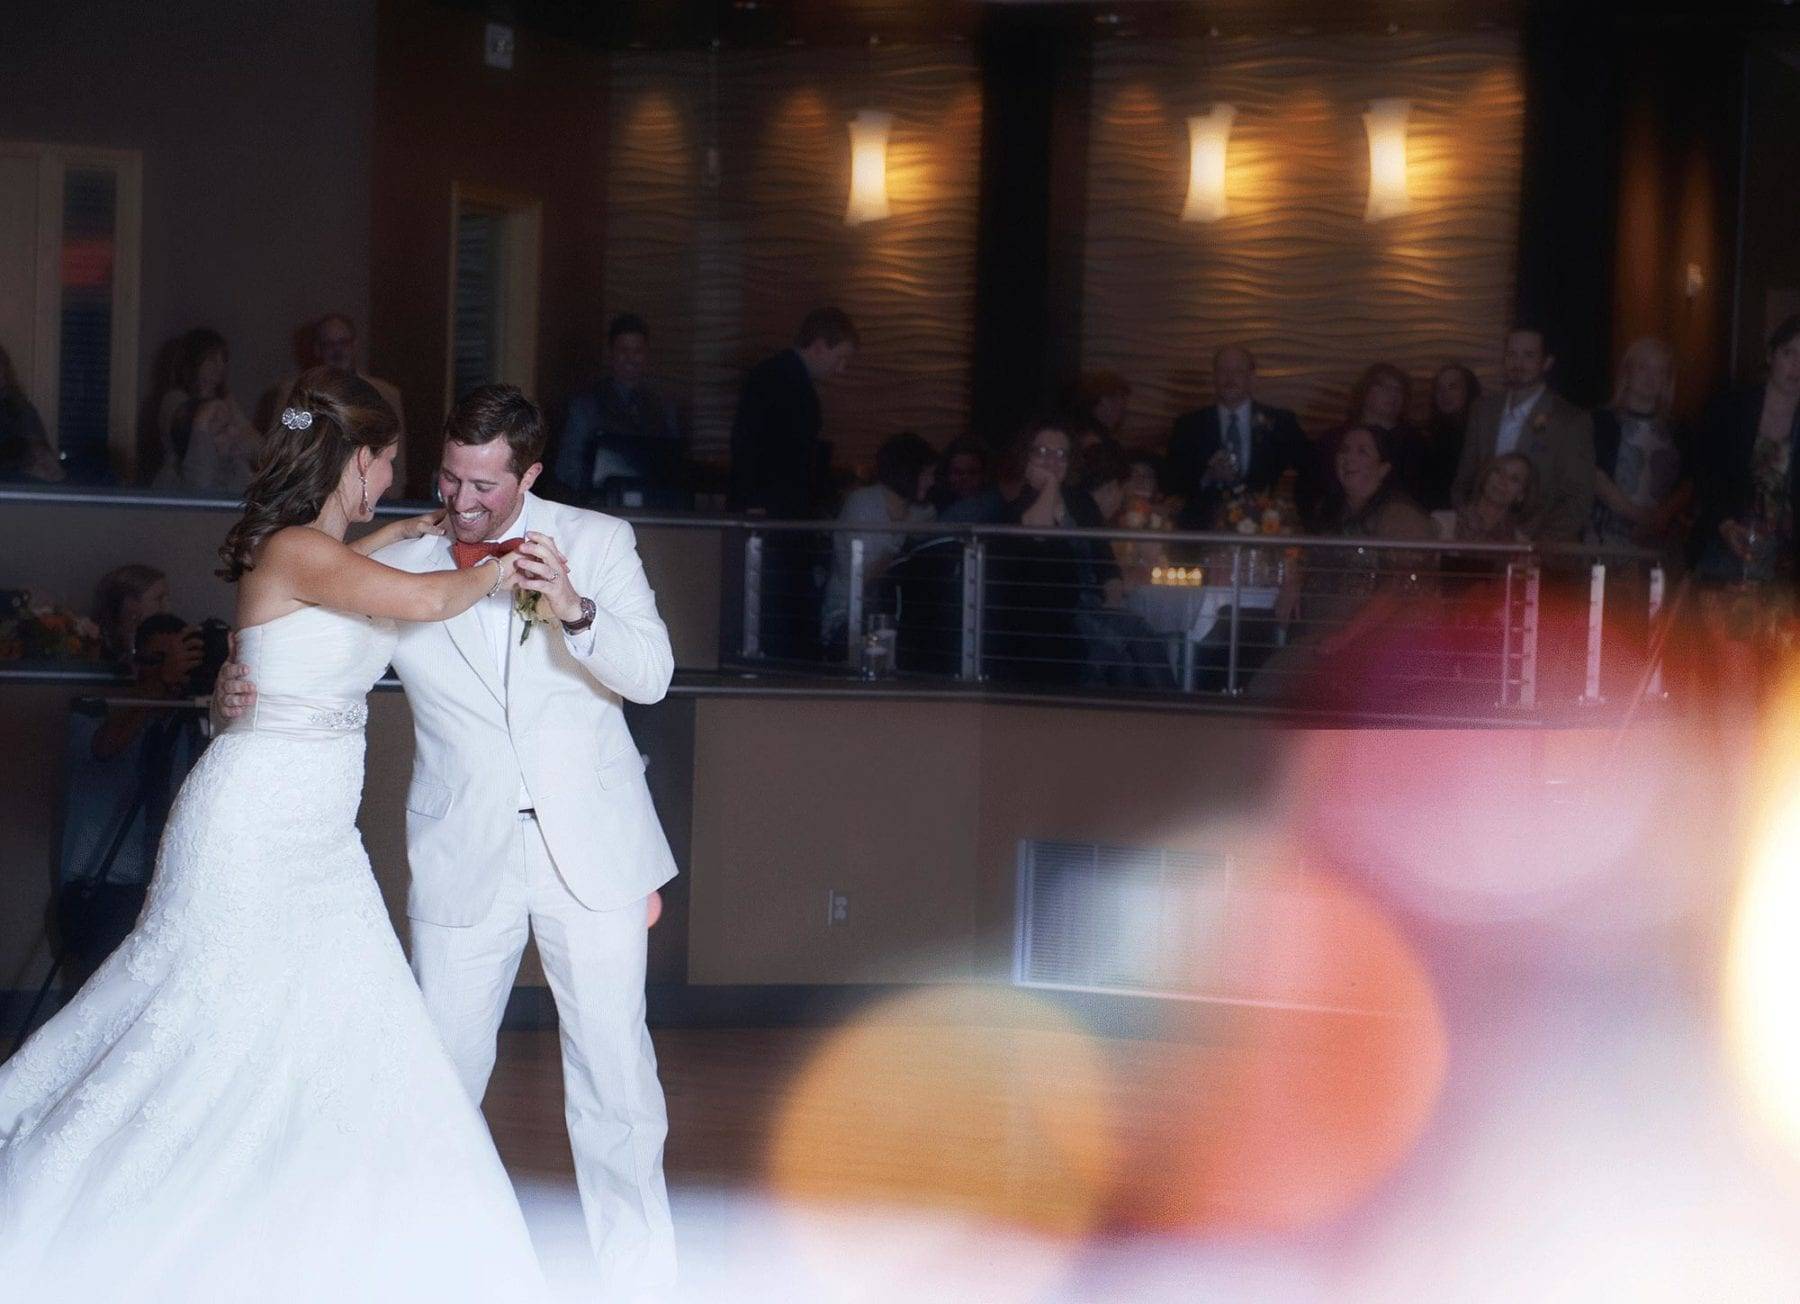 Bride and groom on a colorful dance floor